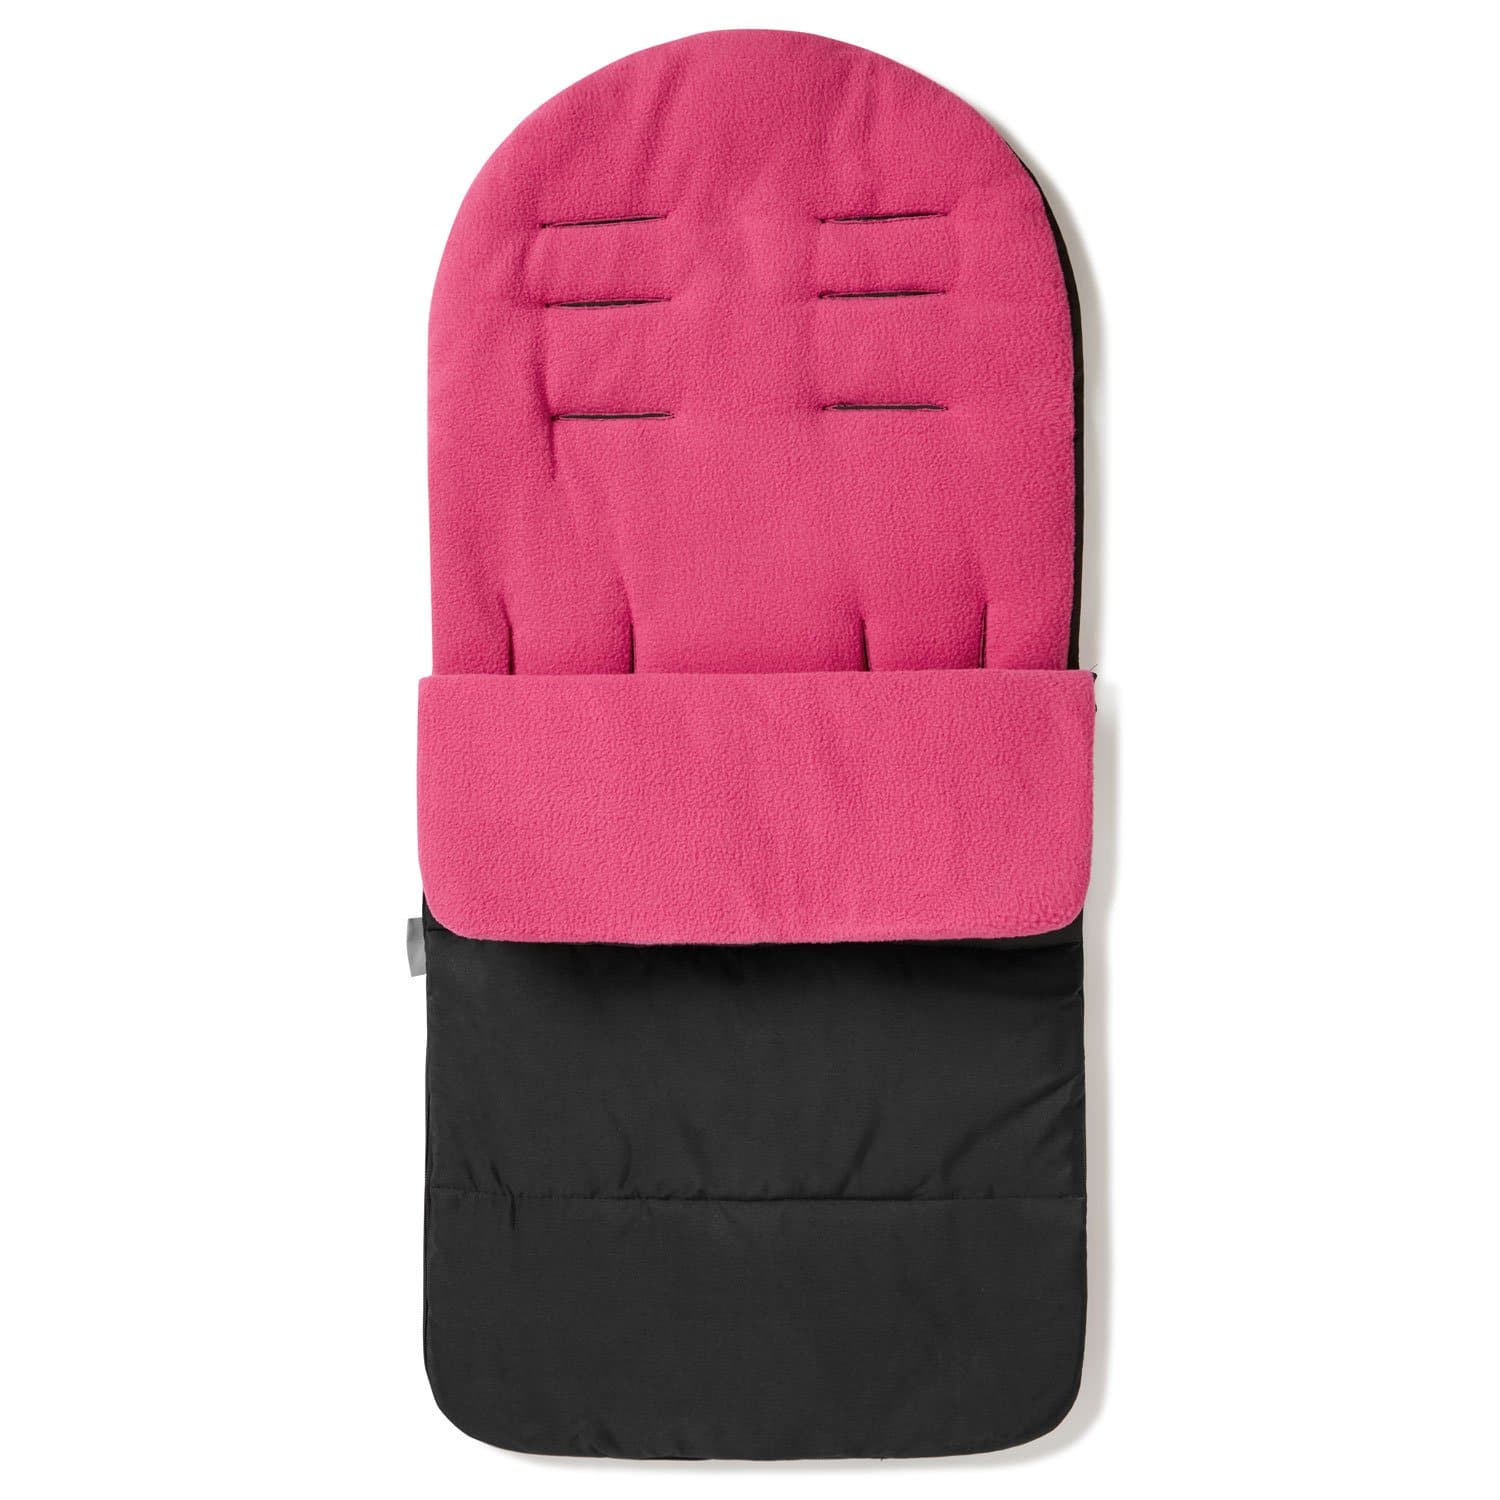 Premium Footmuff / Cosy Toes Compatible with Noukies - Pink Rose / Fits All Models | For Your Little One